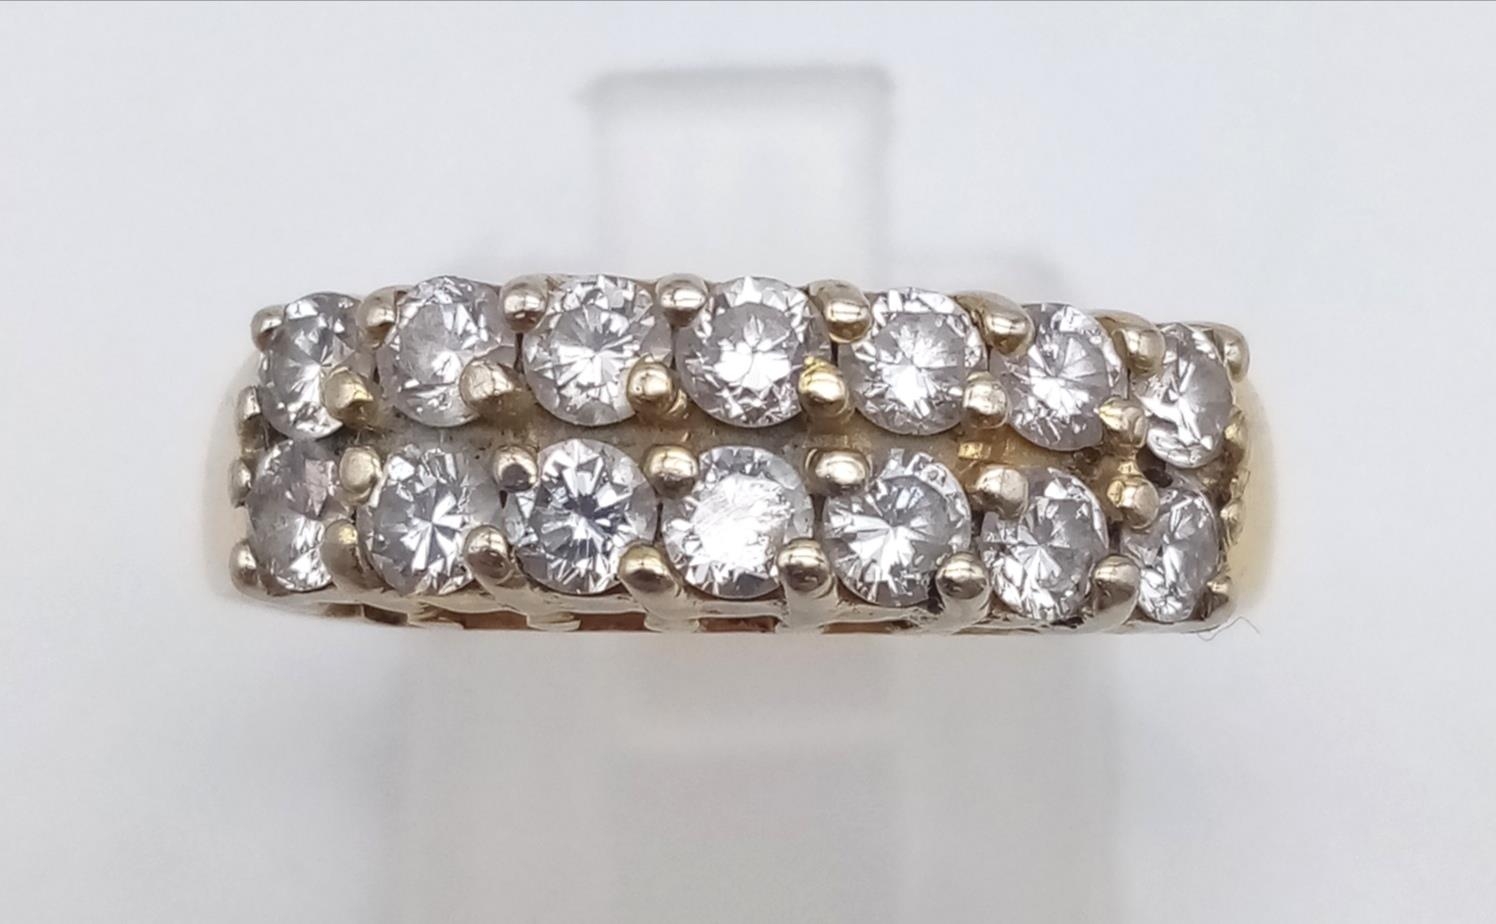 A 14 K yellow gold ring with two rows of diamonds (0.6 carats). Ring size: N, weight: 5.2 g. - Image 2 of 5